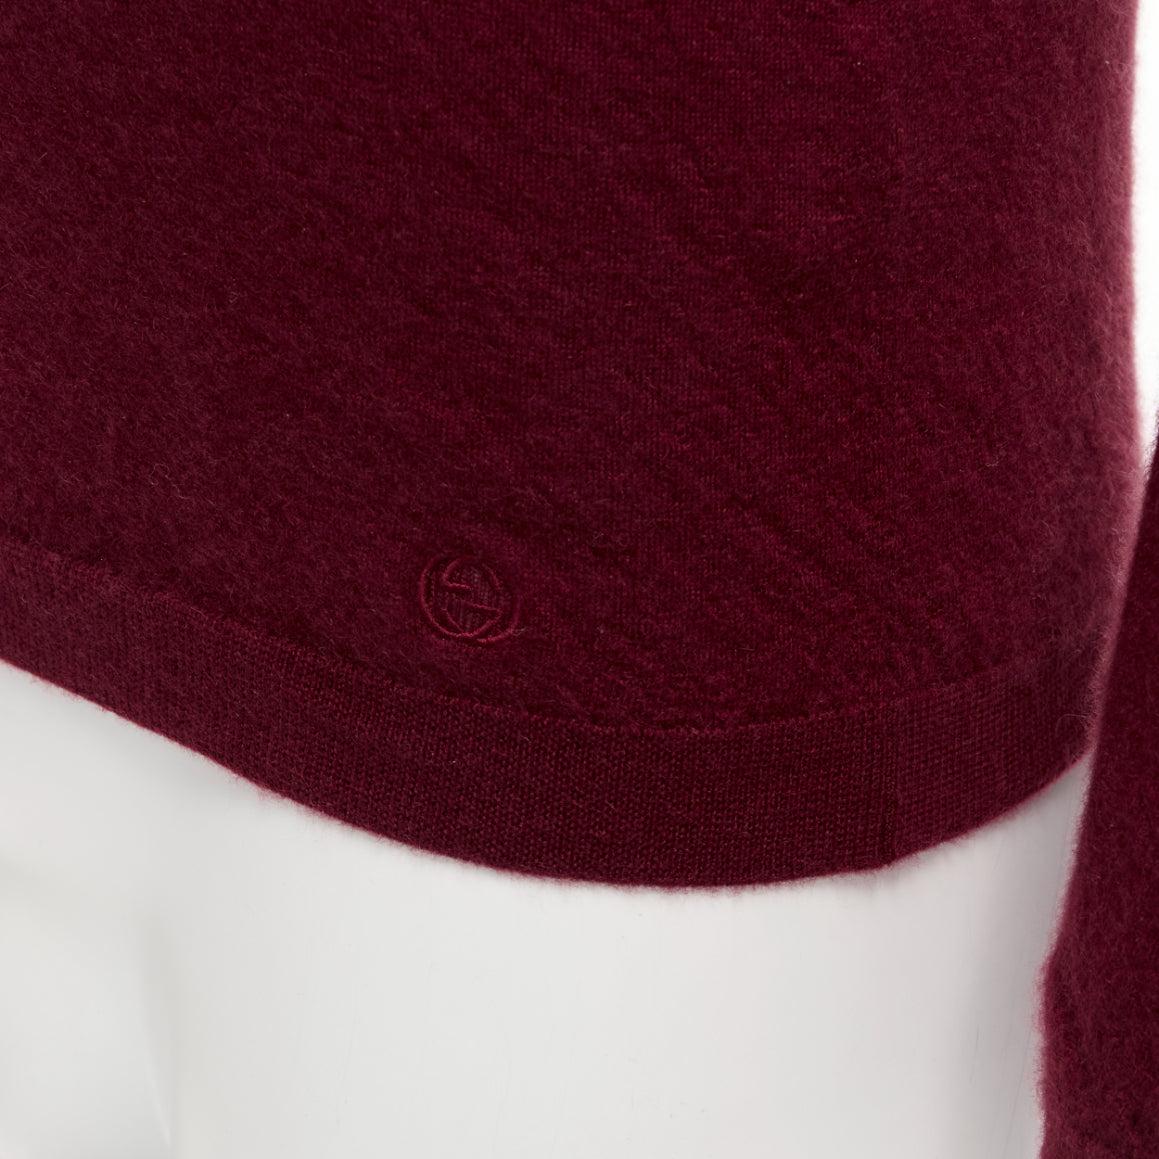 GUCCI Vintage 100% cashmere burgundy GG logo bateau neck sweater L
Reference: JSLE/A00119
Brand: Gucci
Material: Cashmere
Color: Burgundy
Pattern: Solid
Closure: Pullover
Extra Details: Discreet GG logo at right hem.
Made in: